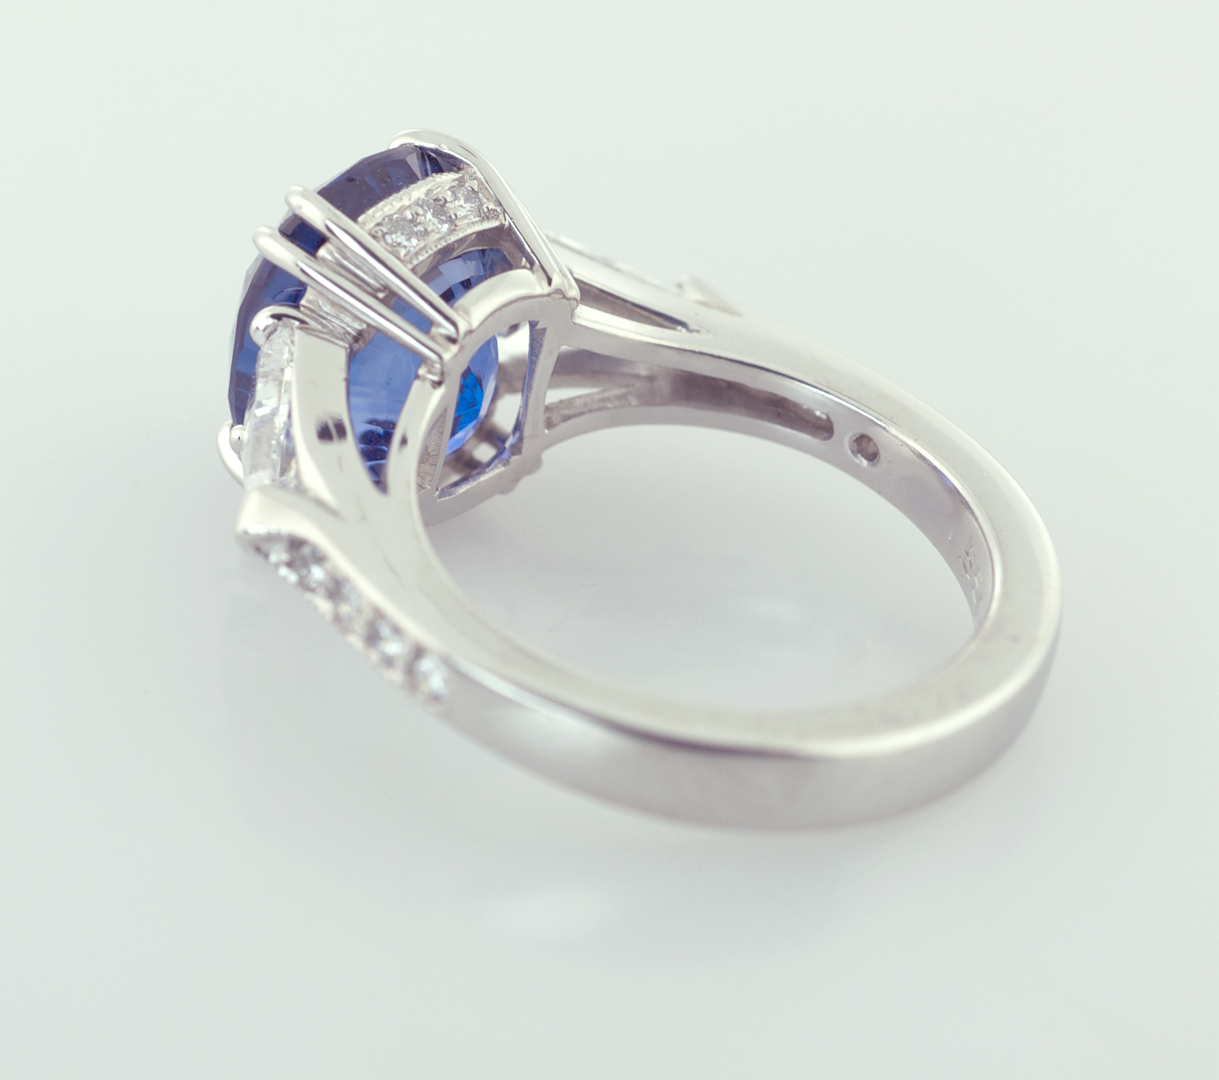 Oval Sapphire 3.50ct. and Trilliam Shape Diamonds Platinum Ring, Back View